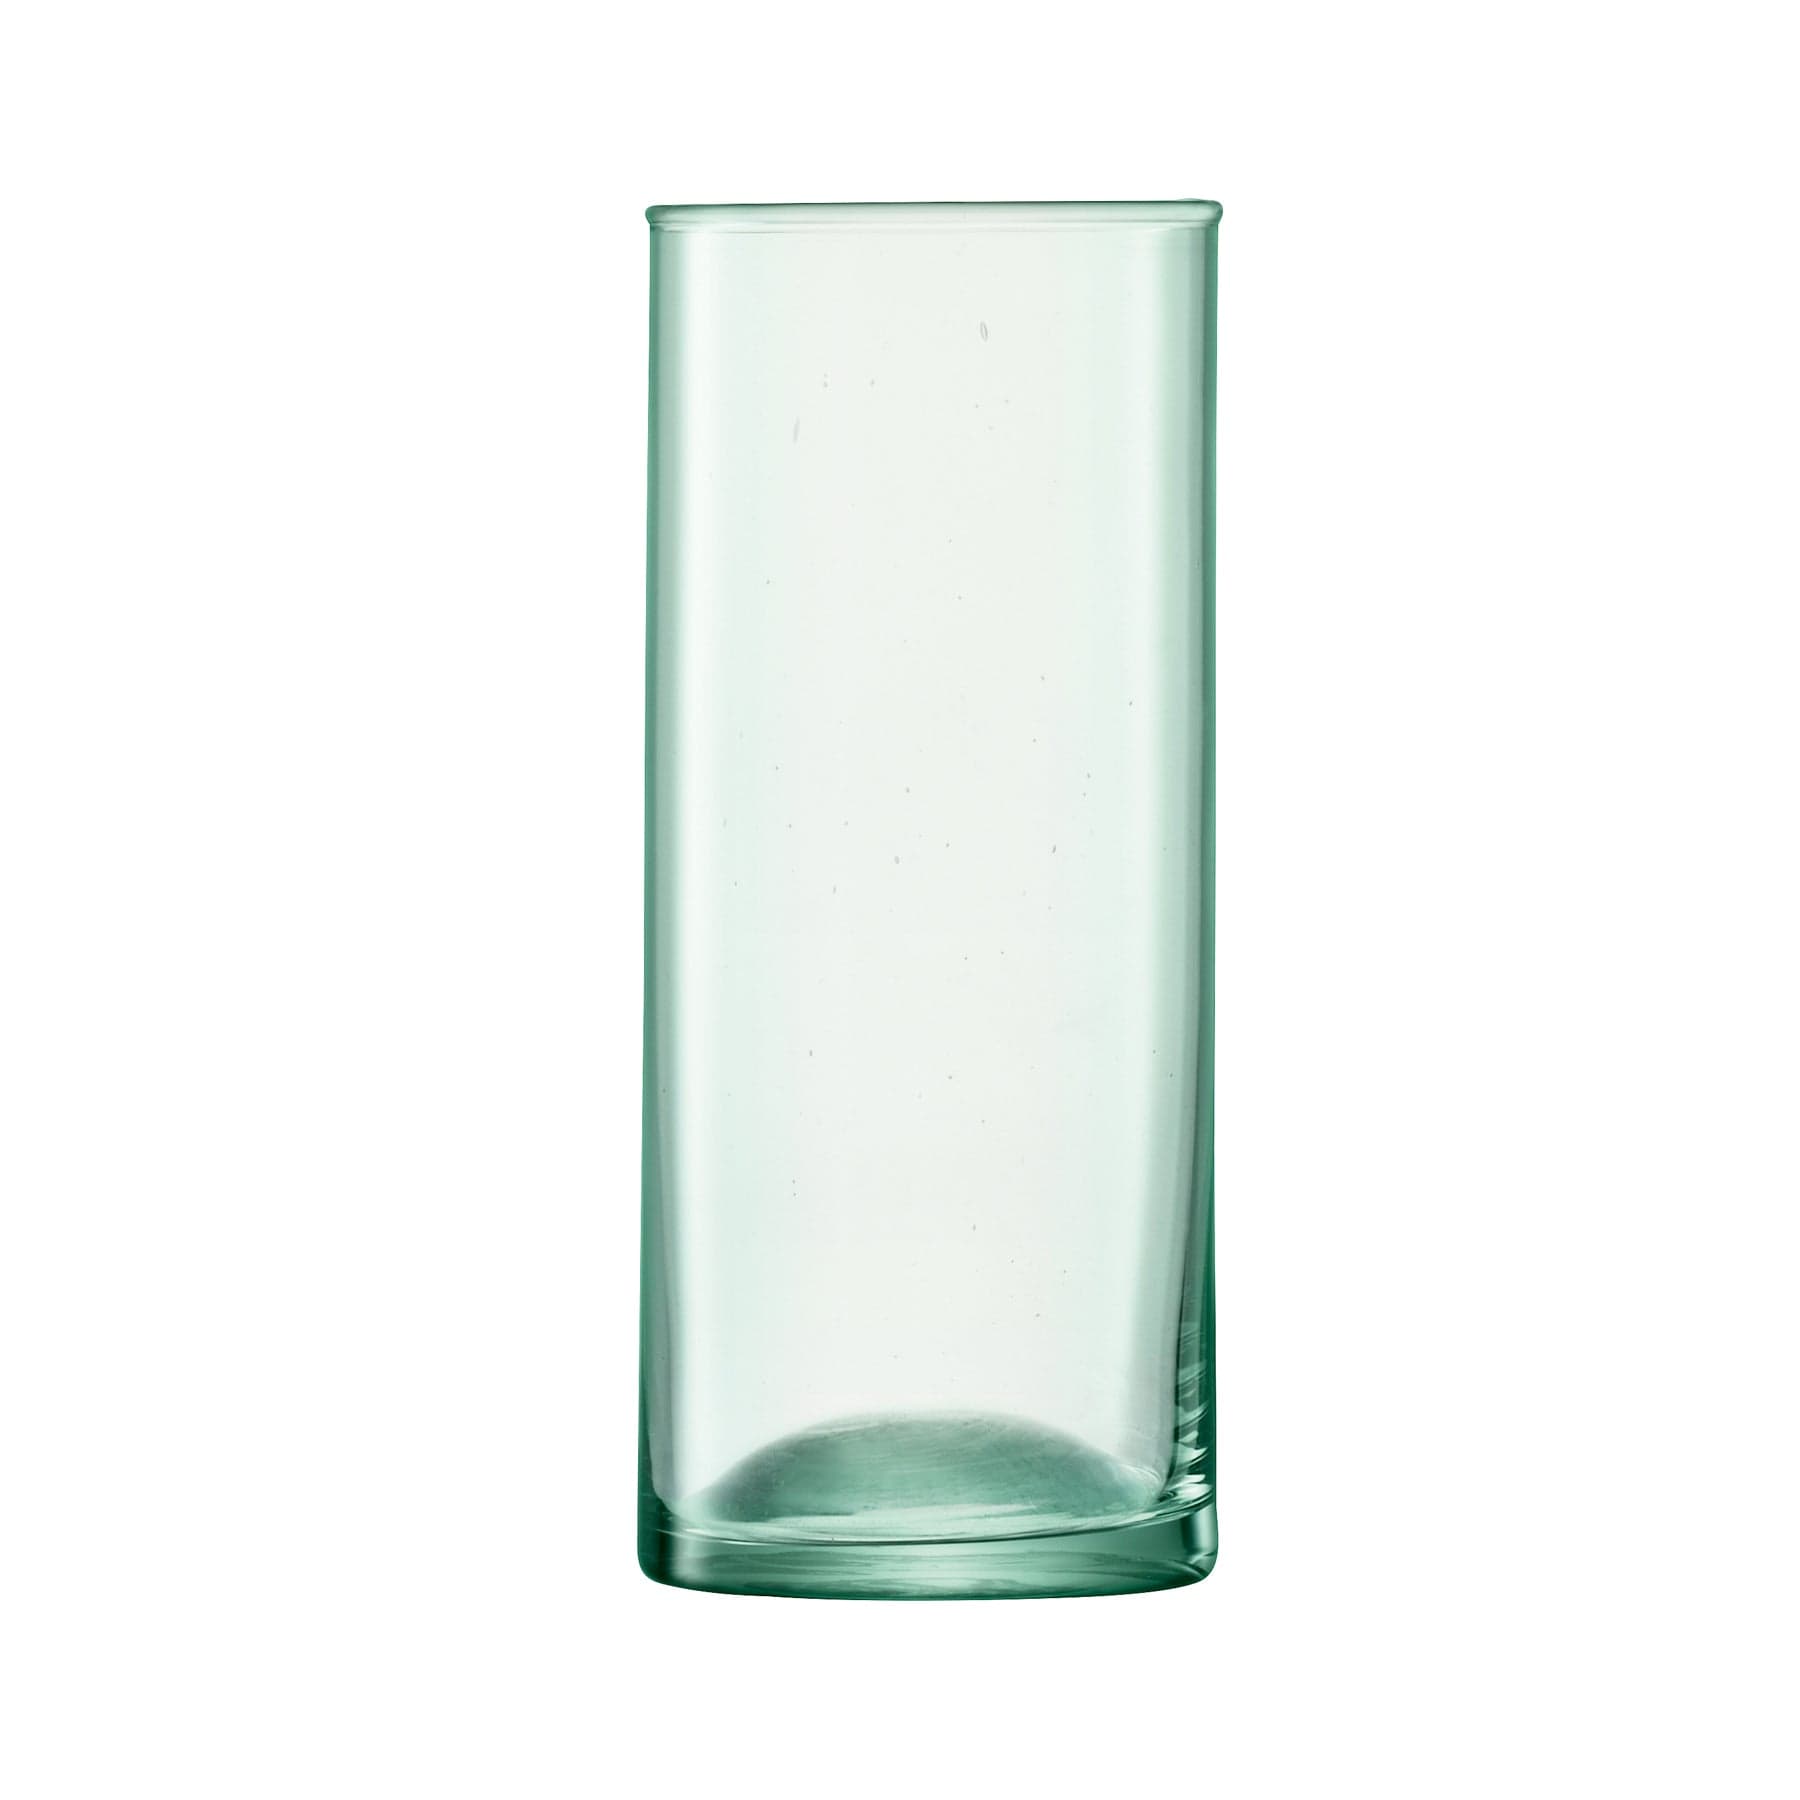 Canopy beer glass 520ml x 4